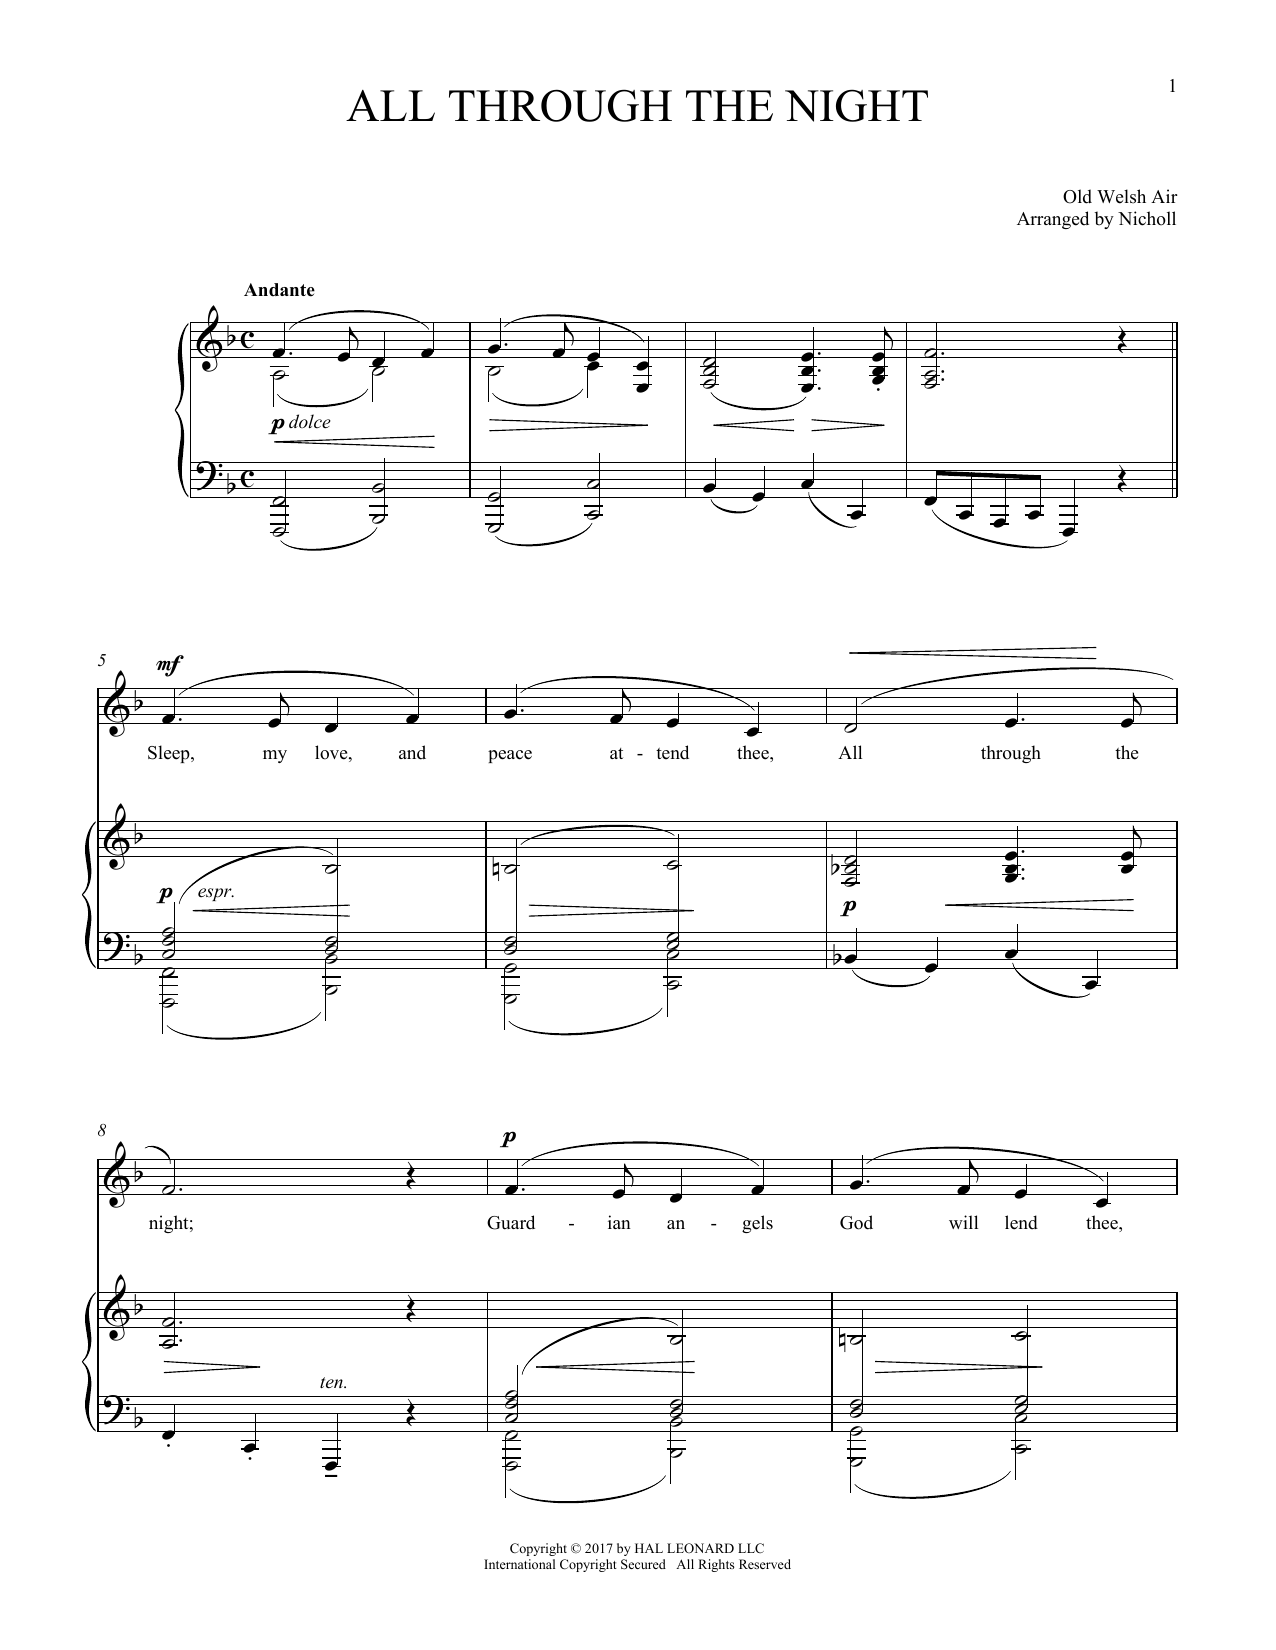 Download Welsh Folksong All Through The Night Sheet Music